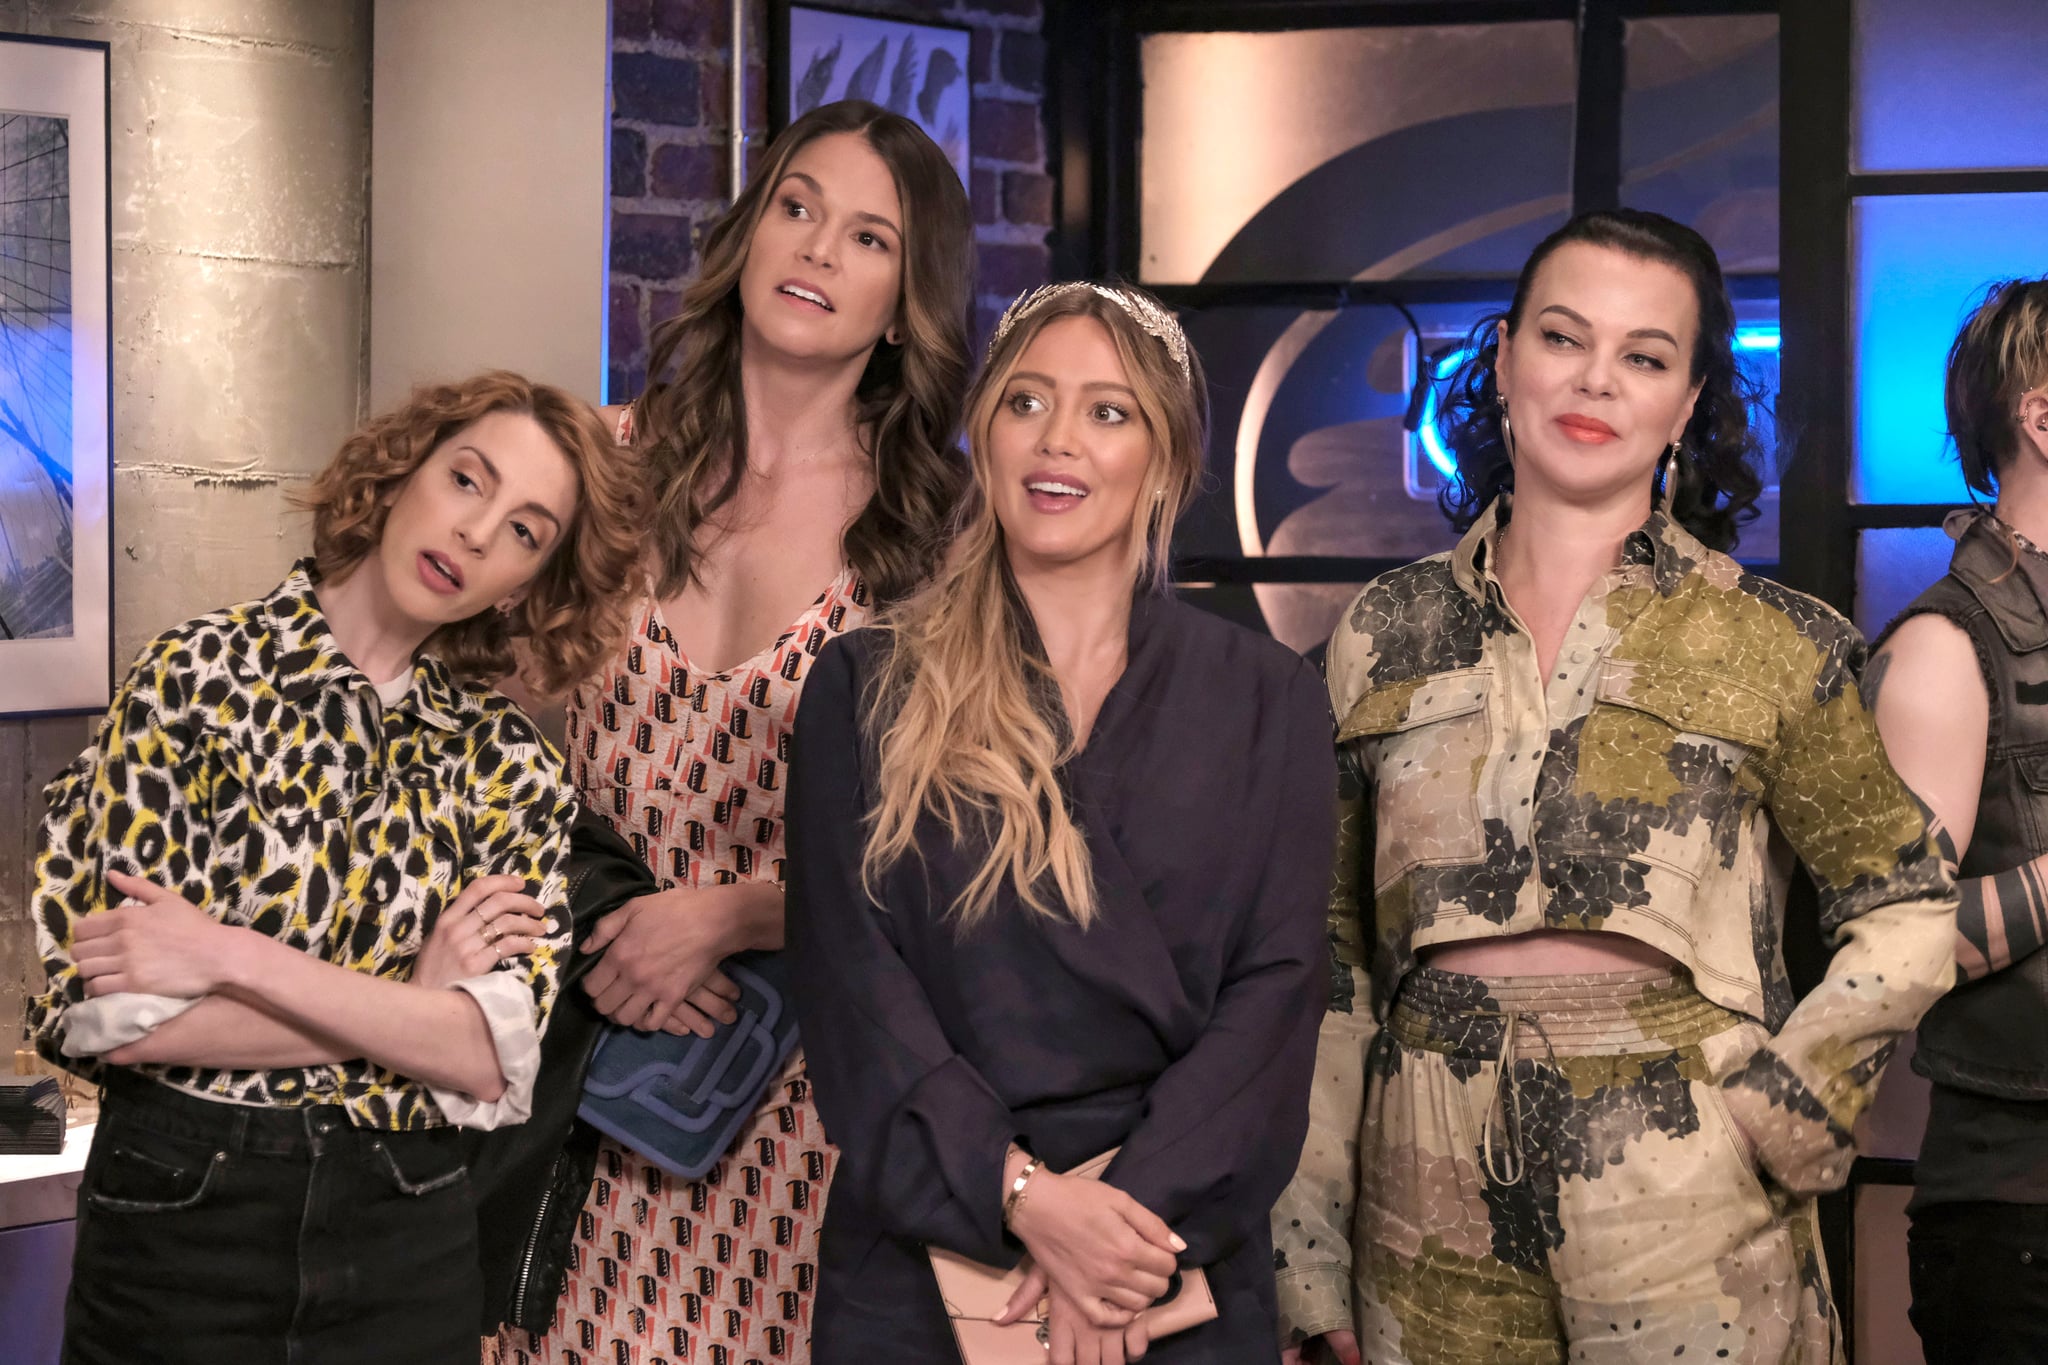 YOUNGER, from left: Molly Bernard, Sutton Foster, Hilary Duff, Debi Mazar, 'Girls on the Side', (Season 5, ep. 510, aired Aug. 14, 2018). TV Land / courtesy Everett Collection